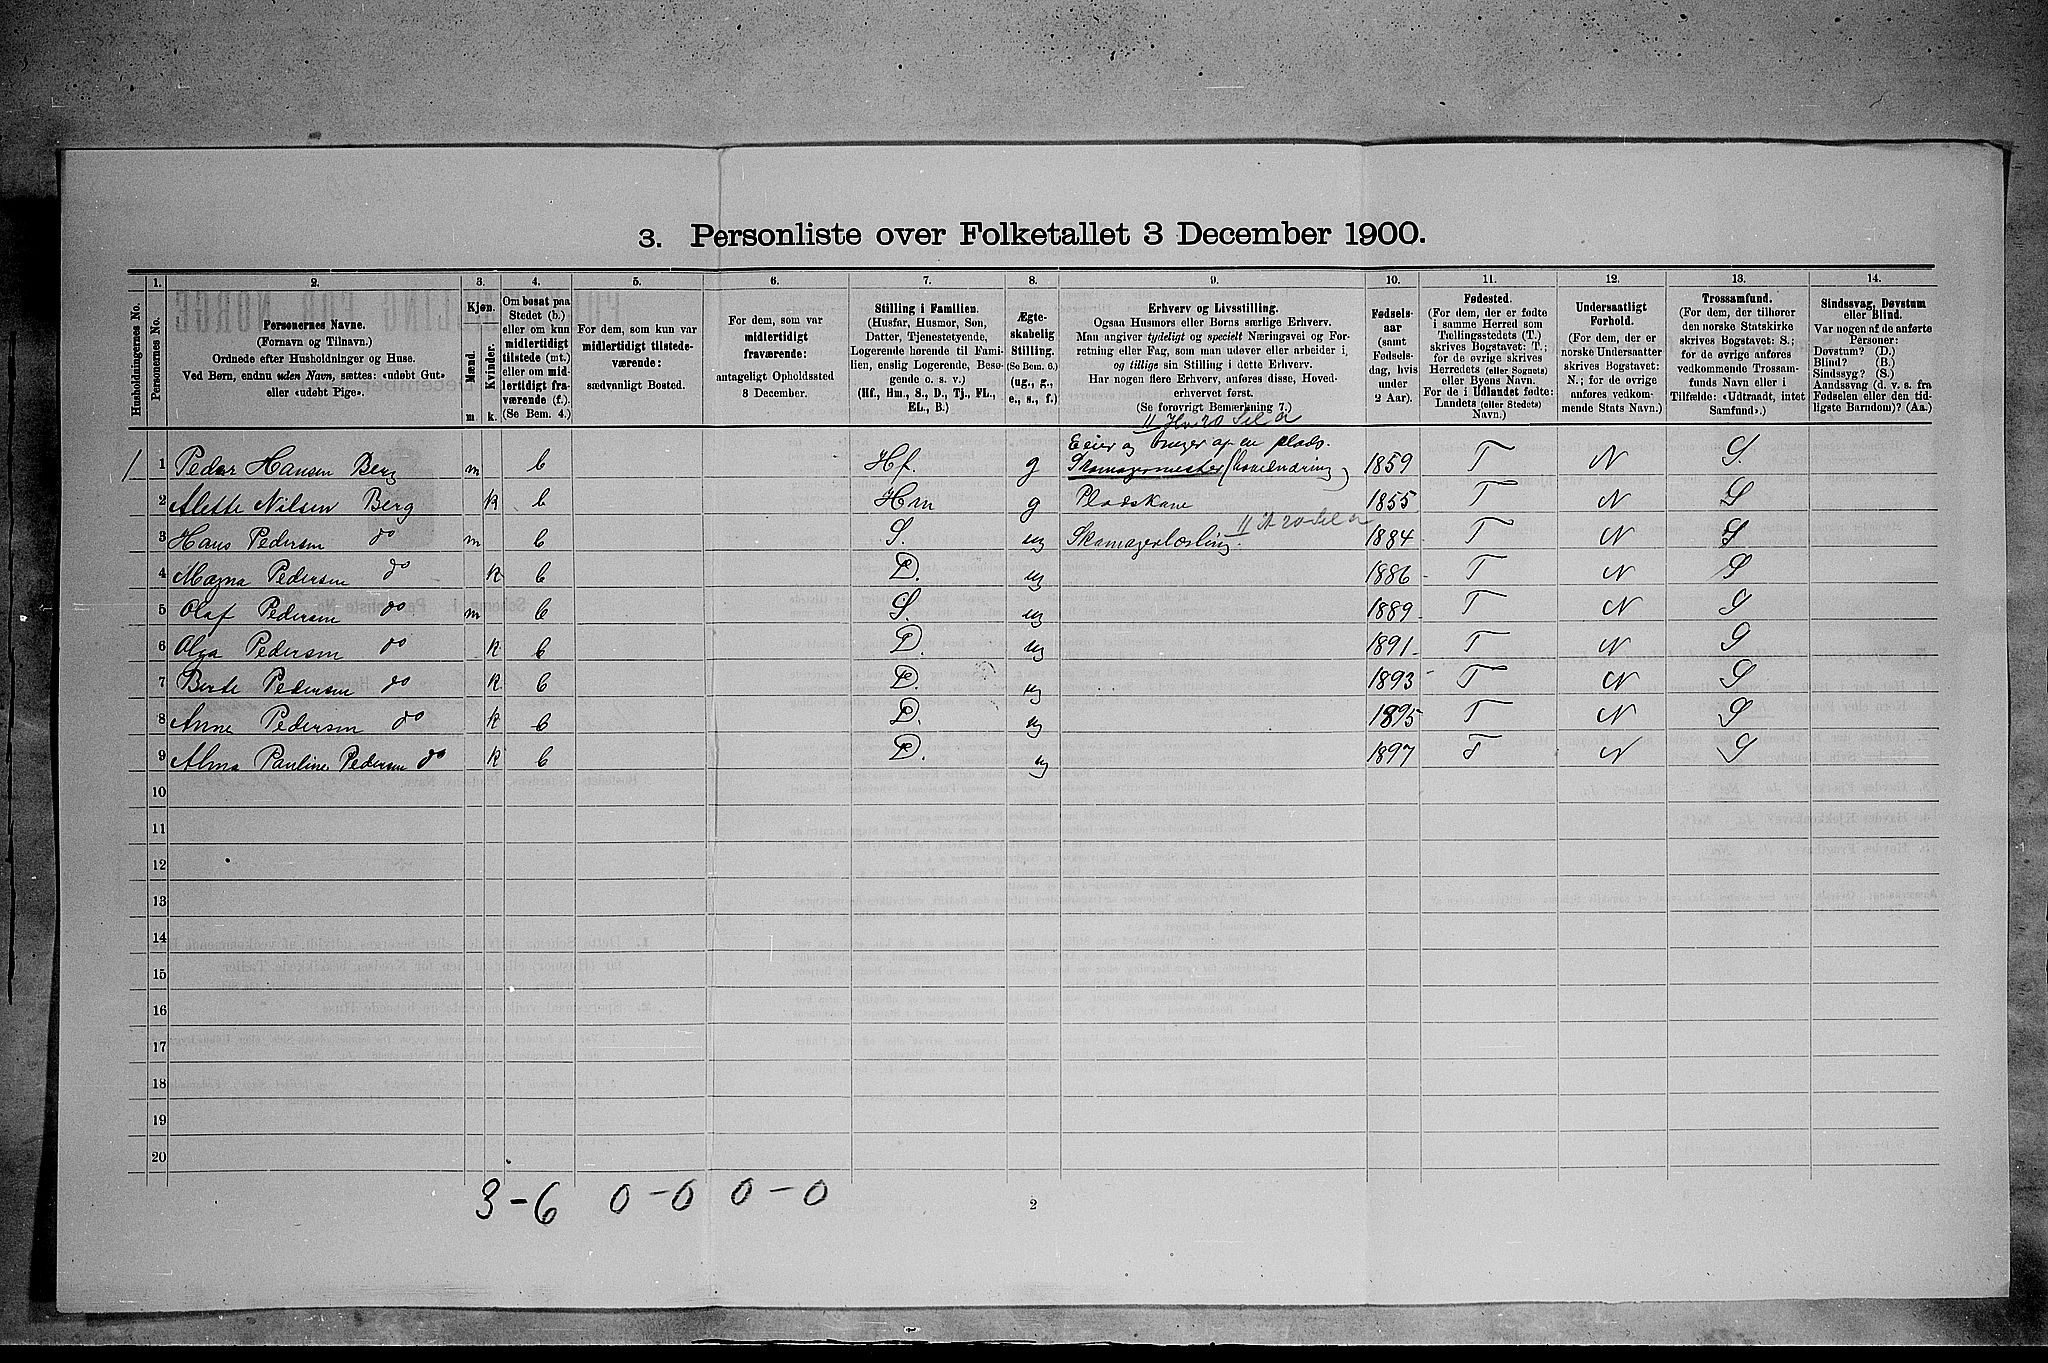 SAH, 1900 census for Nord-Odal, 1900, p. 607